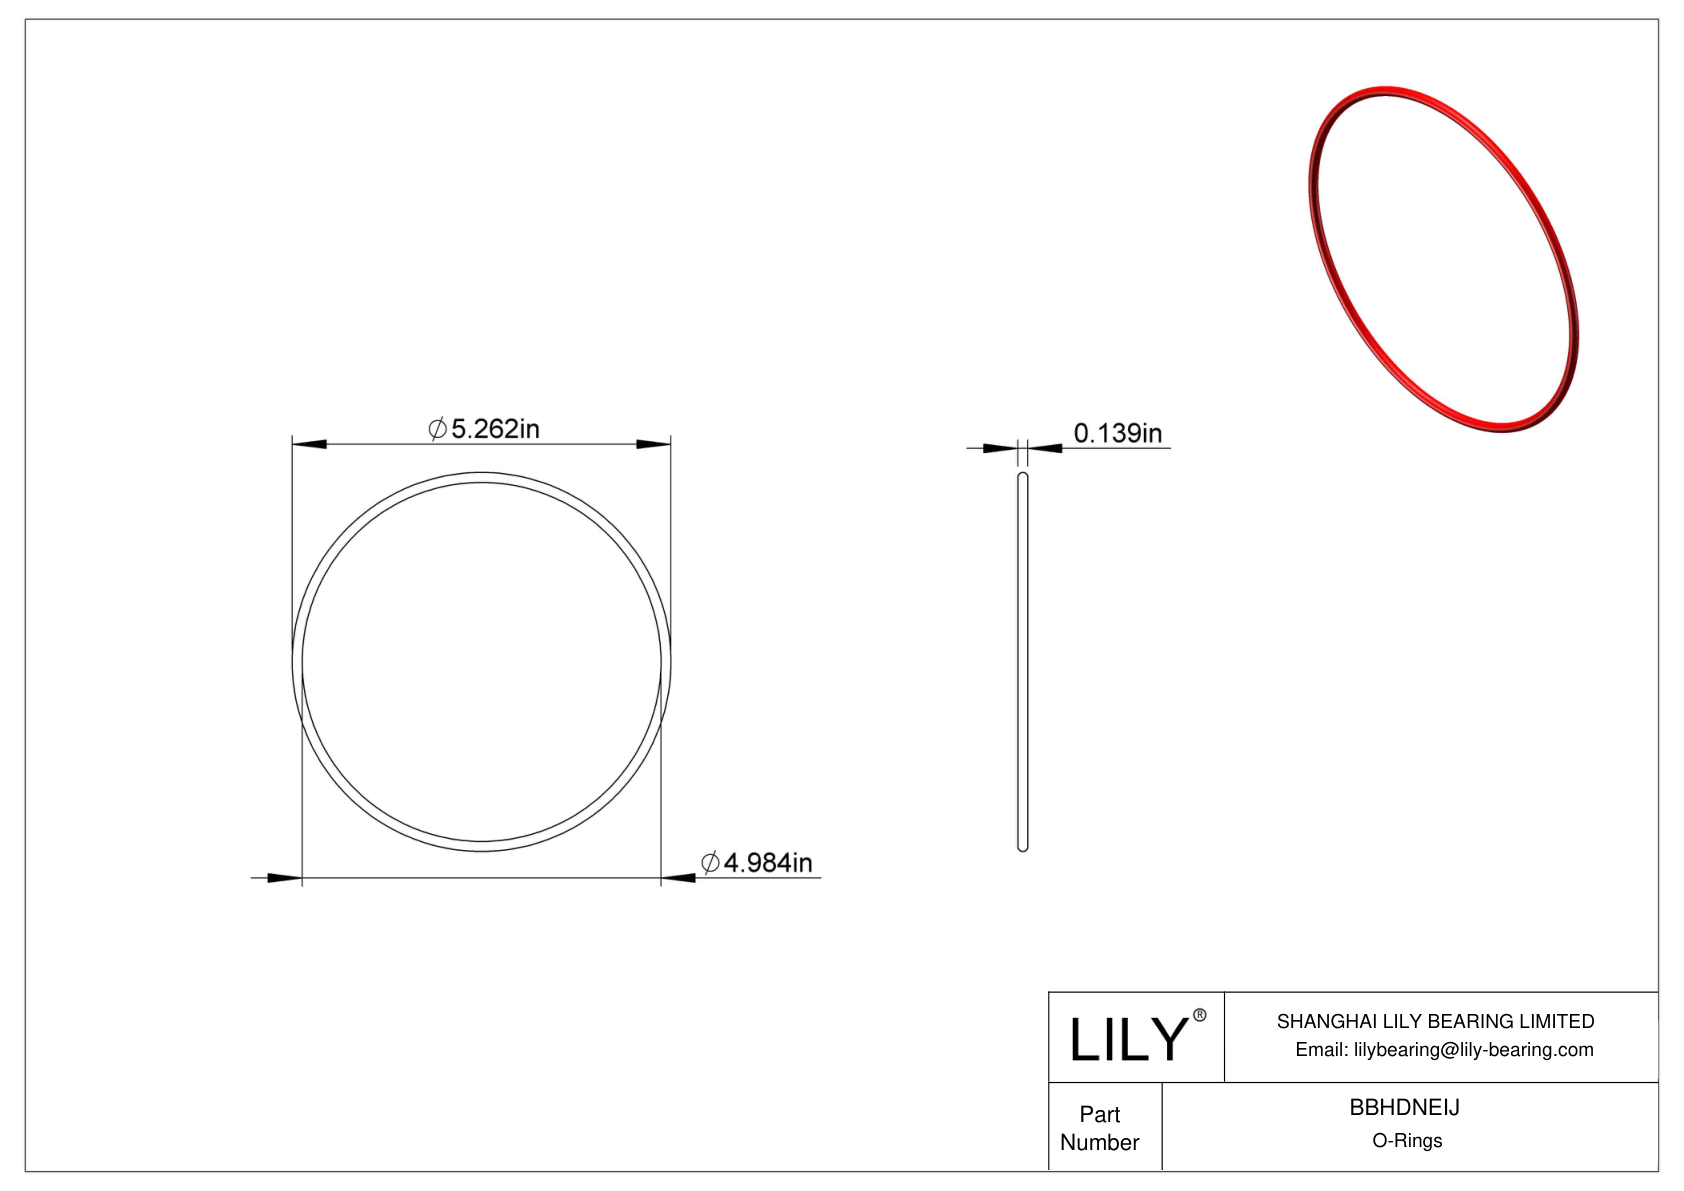 BBHDNEIJ High Temperature O-Rings Round cad drawing